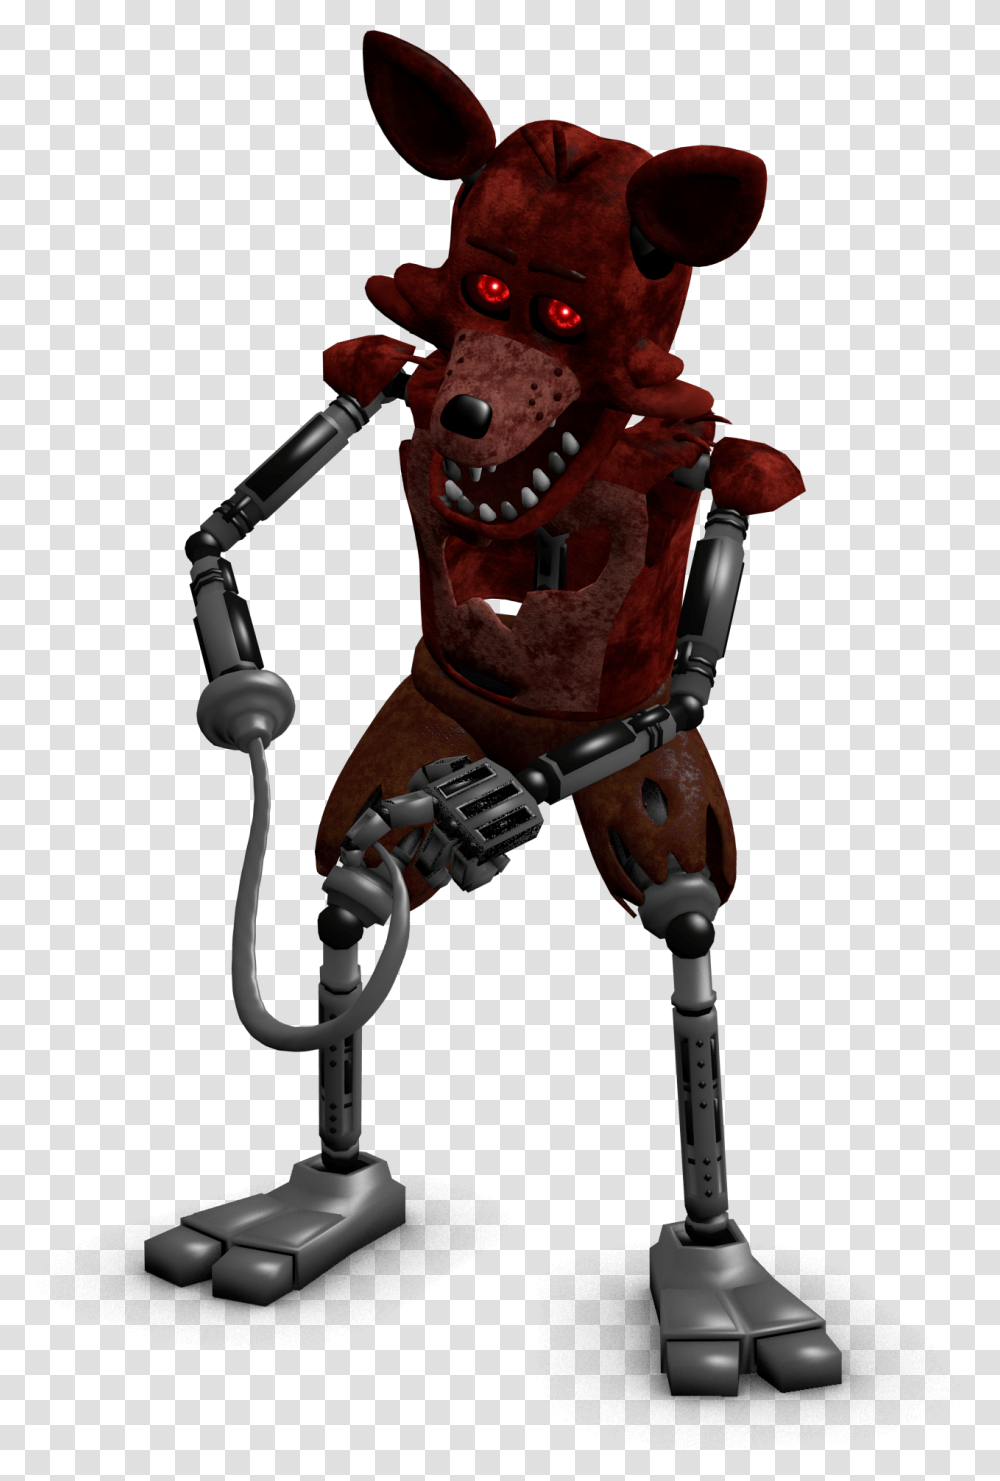 Five Nights At Freddy S 2 Scrap Game Jolt Jump Scare, Toy, Robot, Microphone, Electrical Device Transparent Png